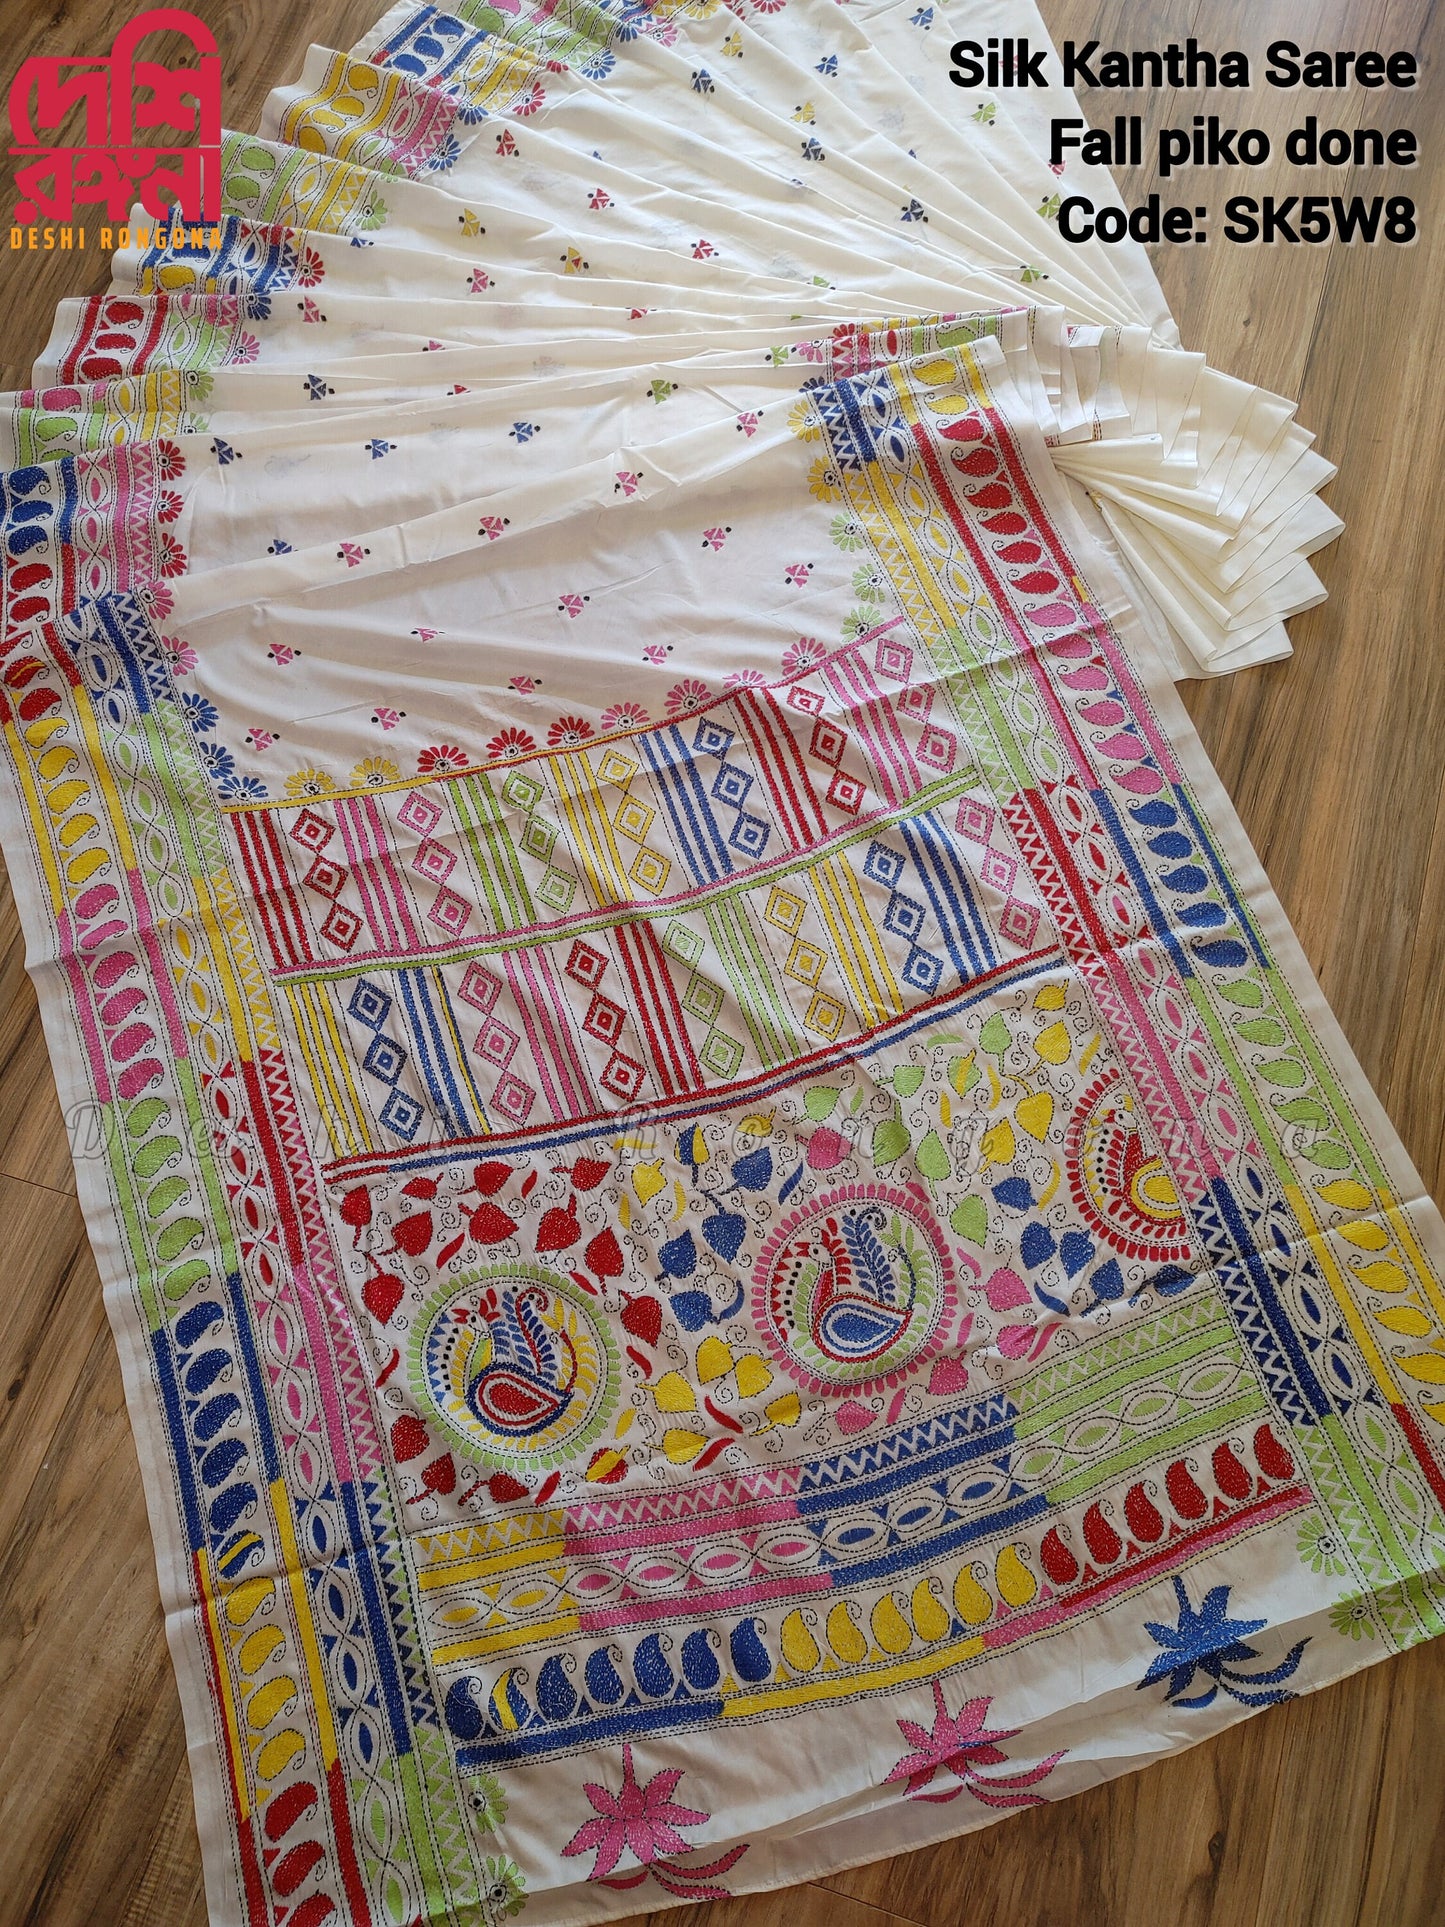 Extraordinary Hand Stiched Kantha Saree, White Pure Bangalore Silk with Multi Color kantha Works allover, Fall/piko done, Elegant and Classy